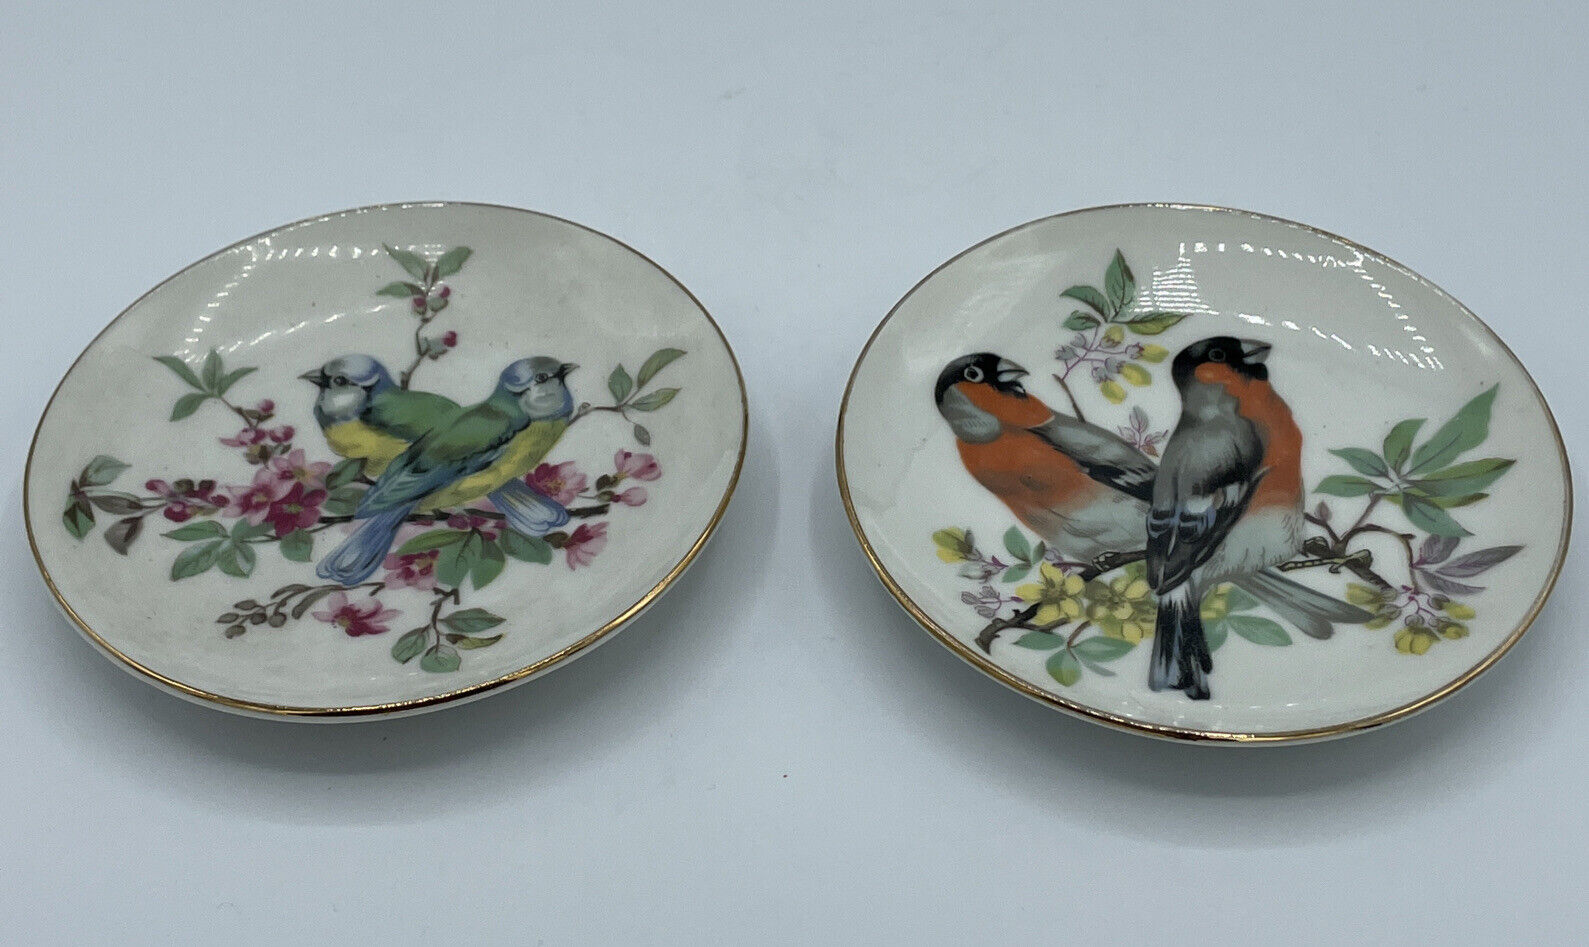 Set of 2 Decorative Bird Porcelain Wall Plates Made in Japan